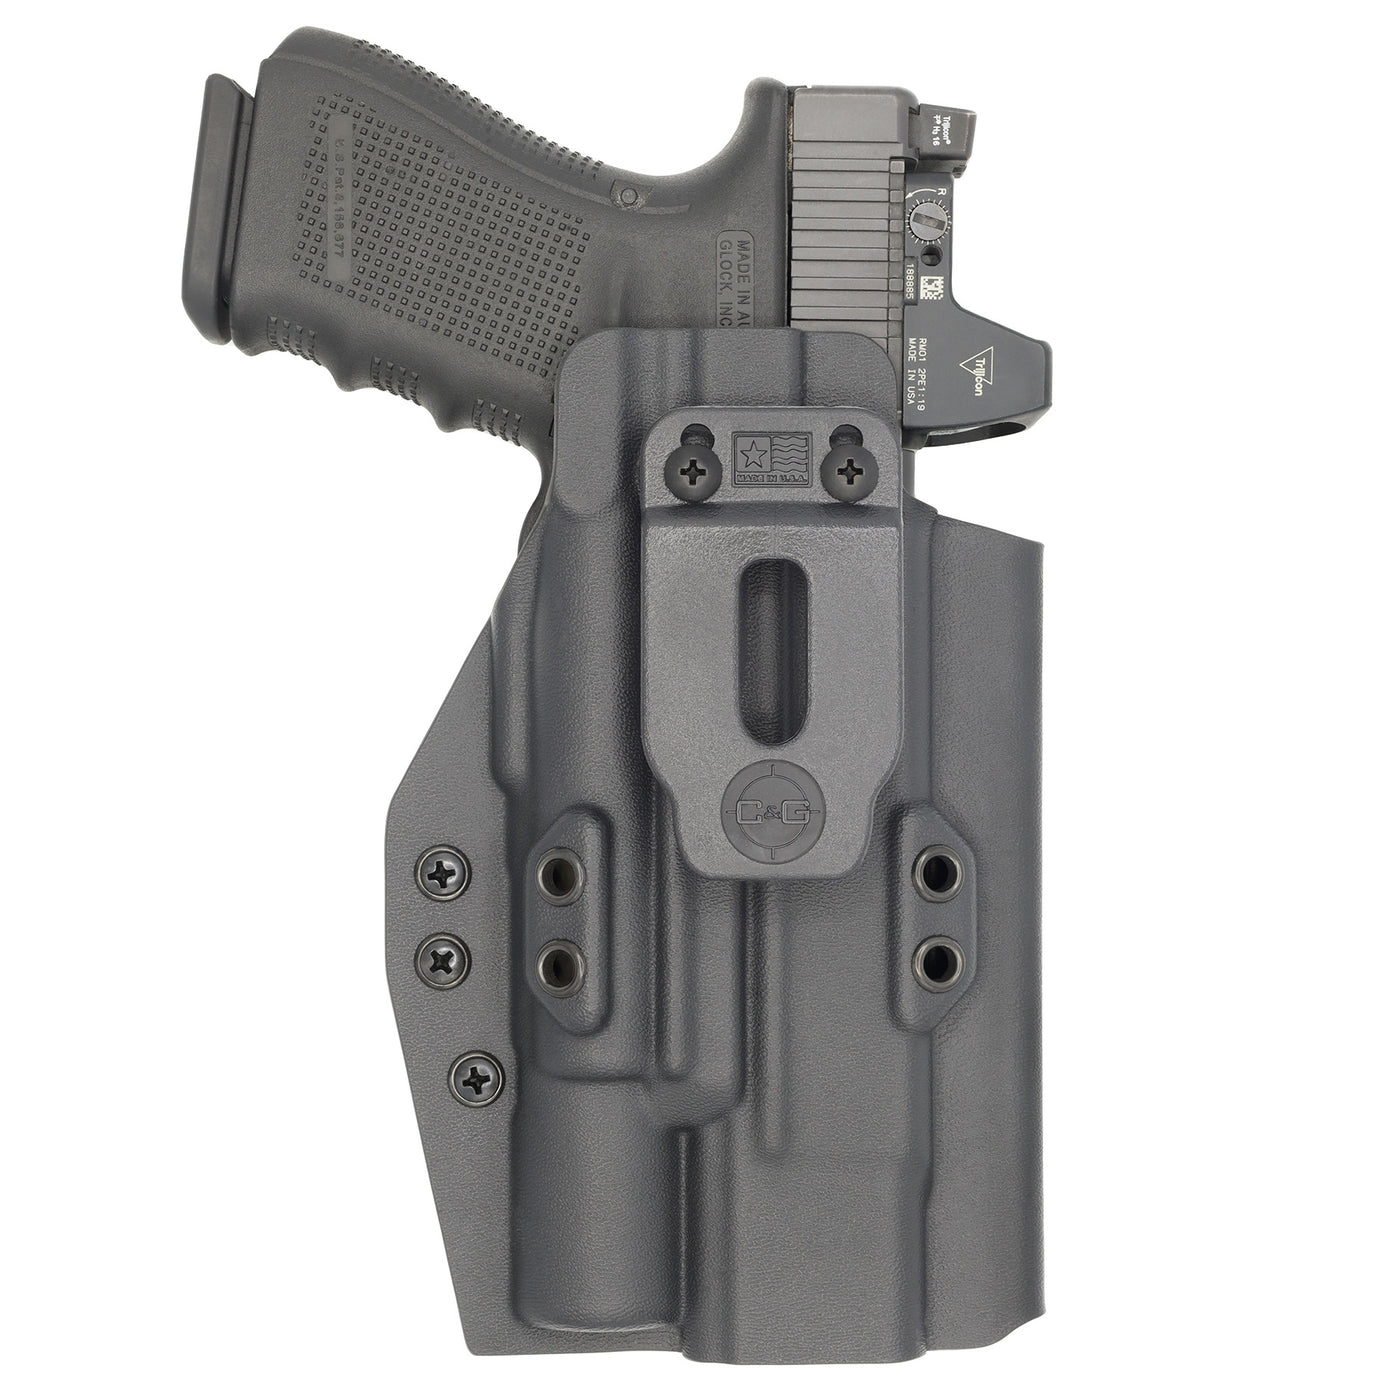 C&G Holsters Custom IWB Tactical Glock Surefire X300 in holstered position